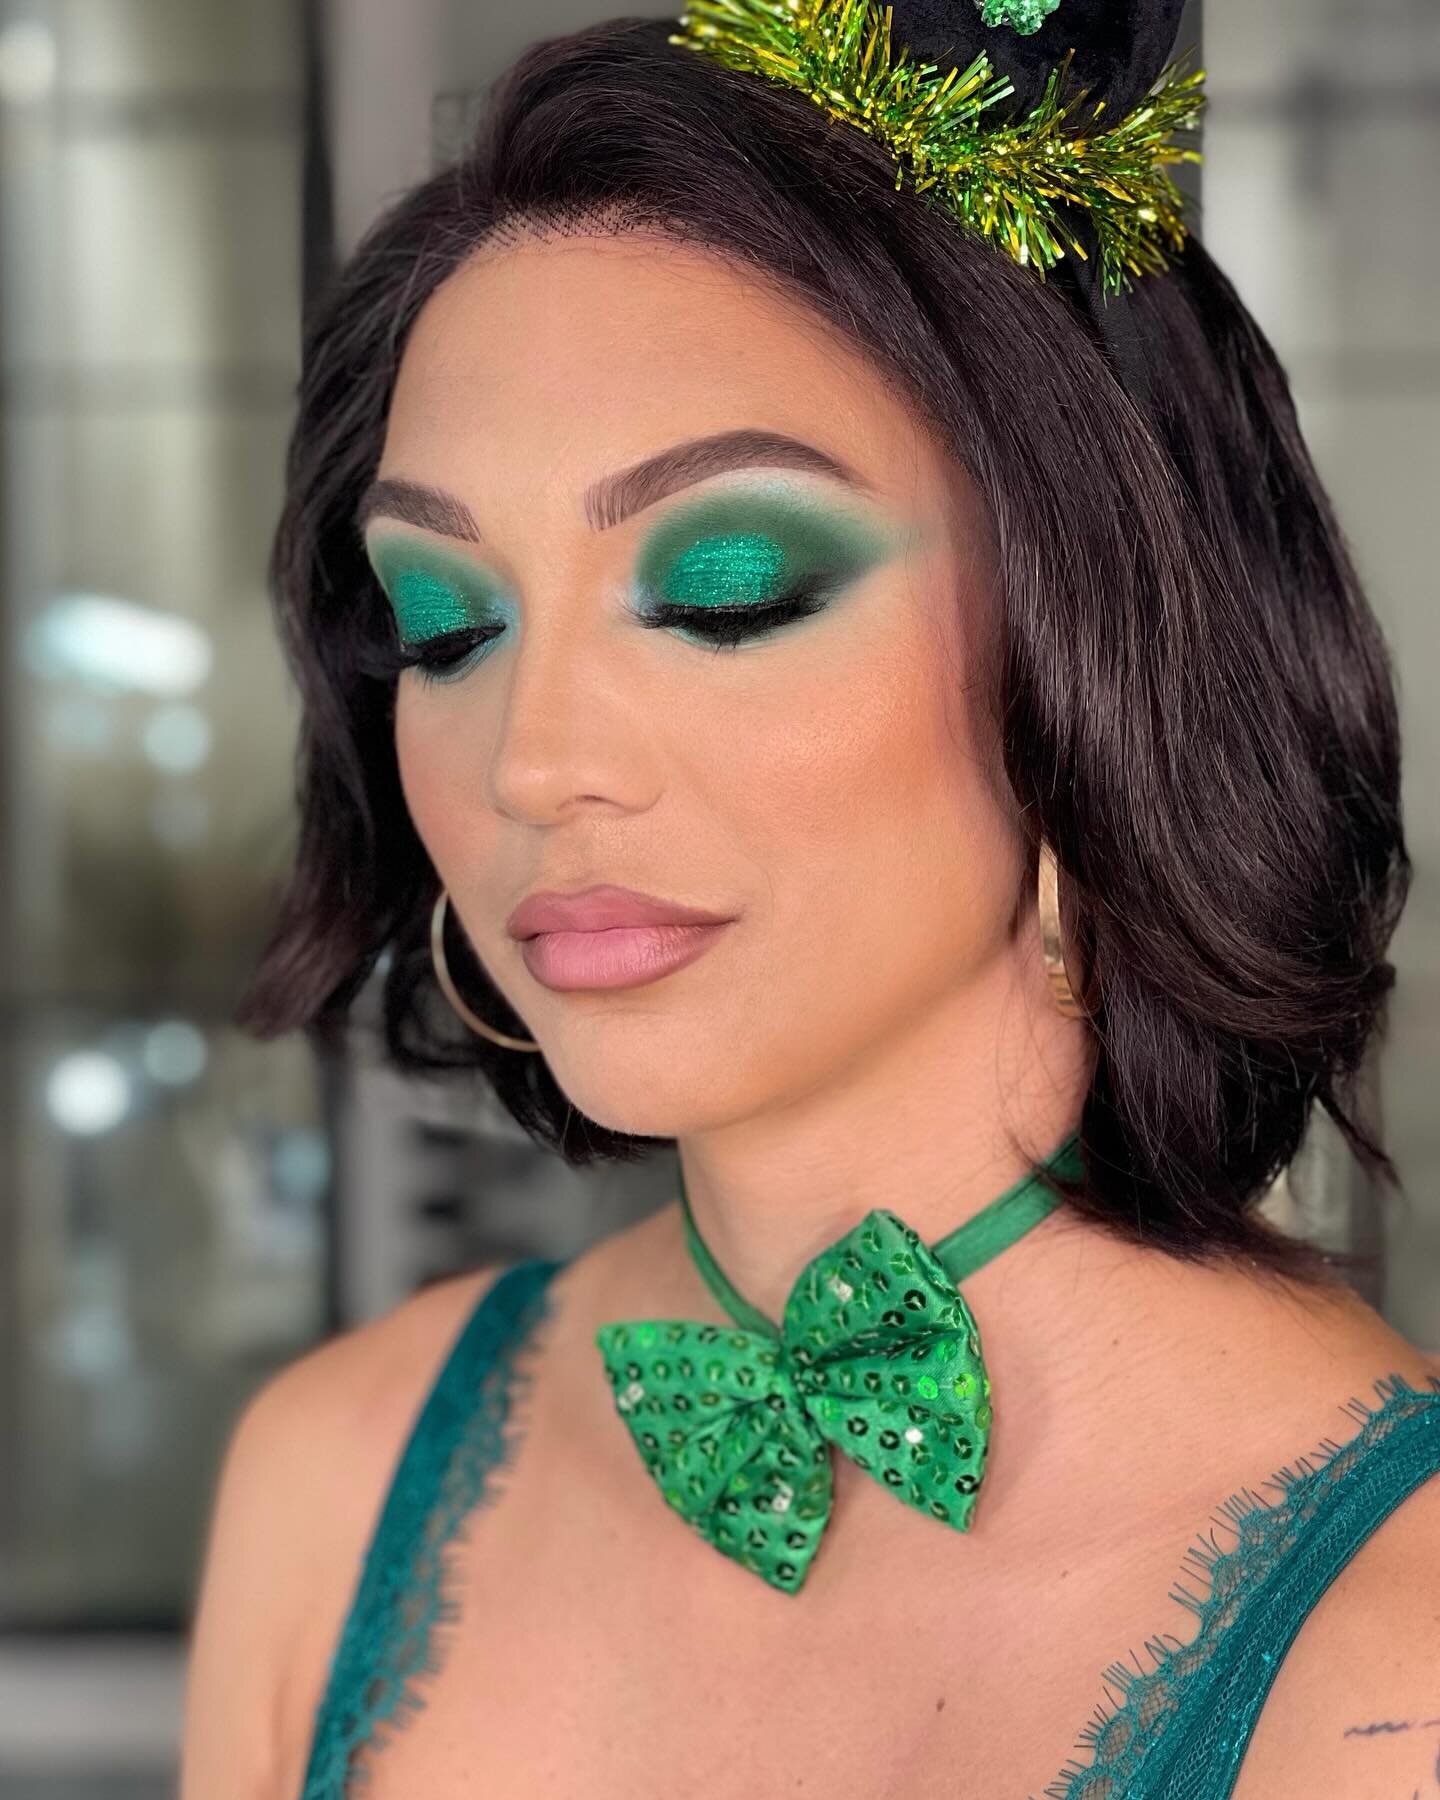 St. Patrick makeup by @wondrouslookmakeup I loved to do these glam artistic makeups with a green powerful color 💚
#miamimakeupartist #makeup #maquillajeprofesional